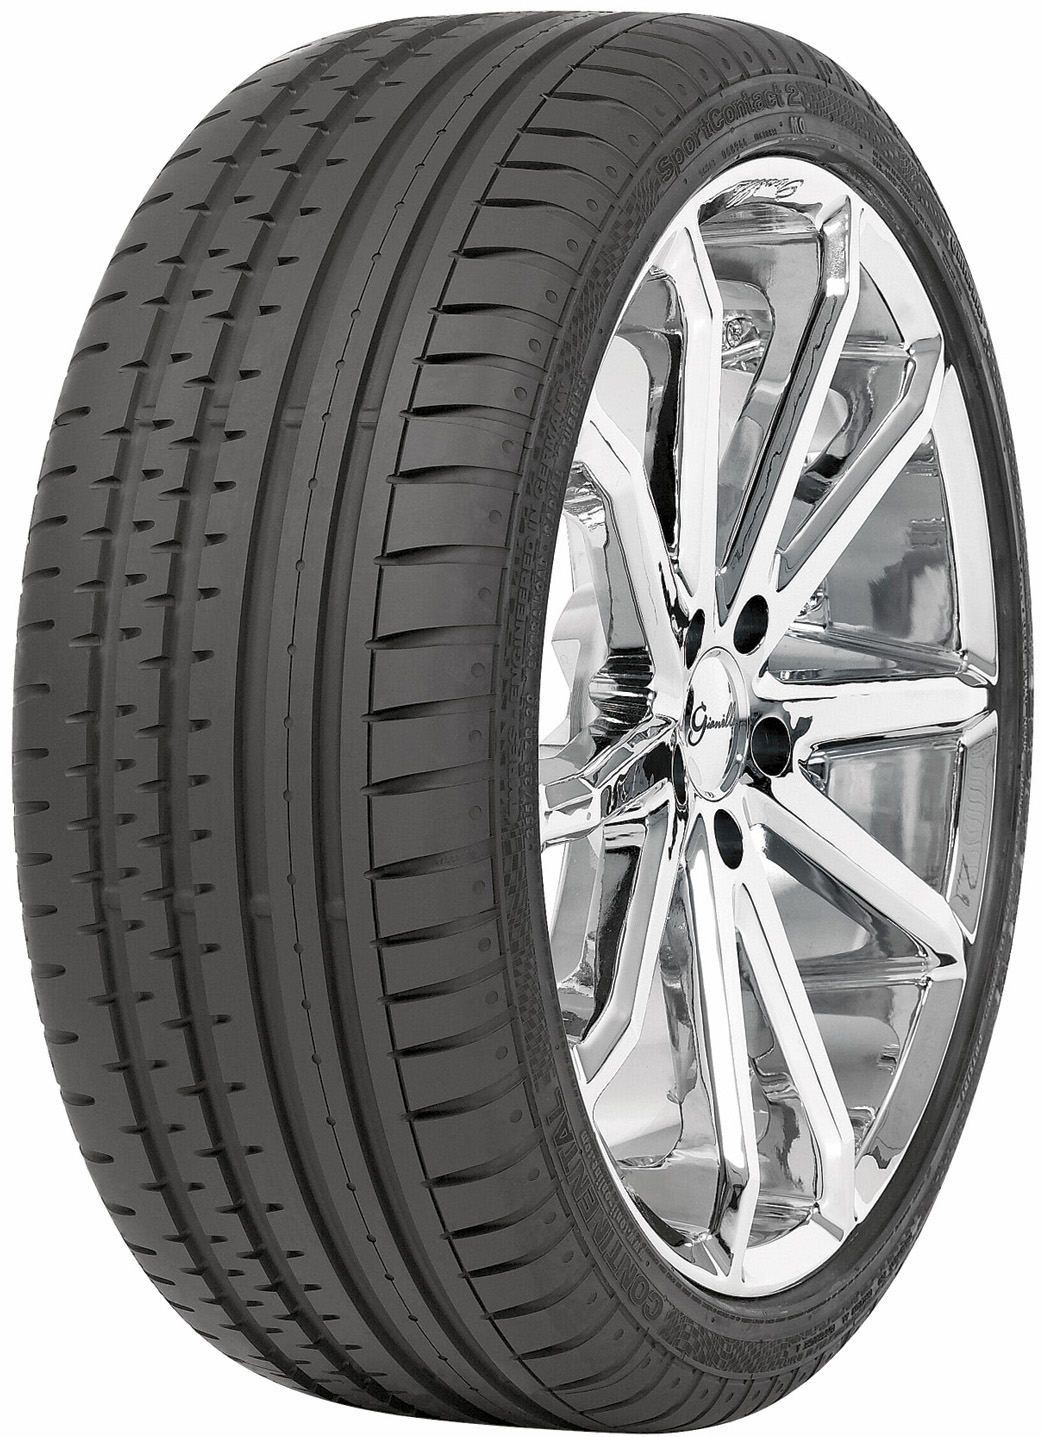 Anvelope auto CONTINENTAL SC-2 AO AUDI FP 205/55 R16 91W